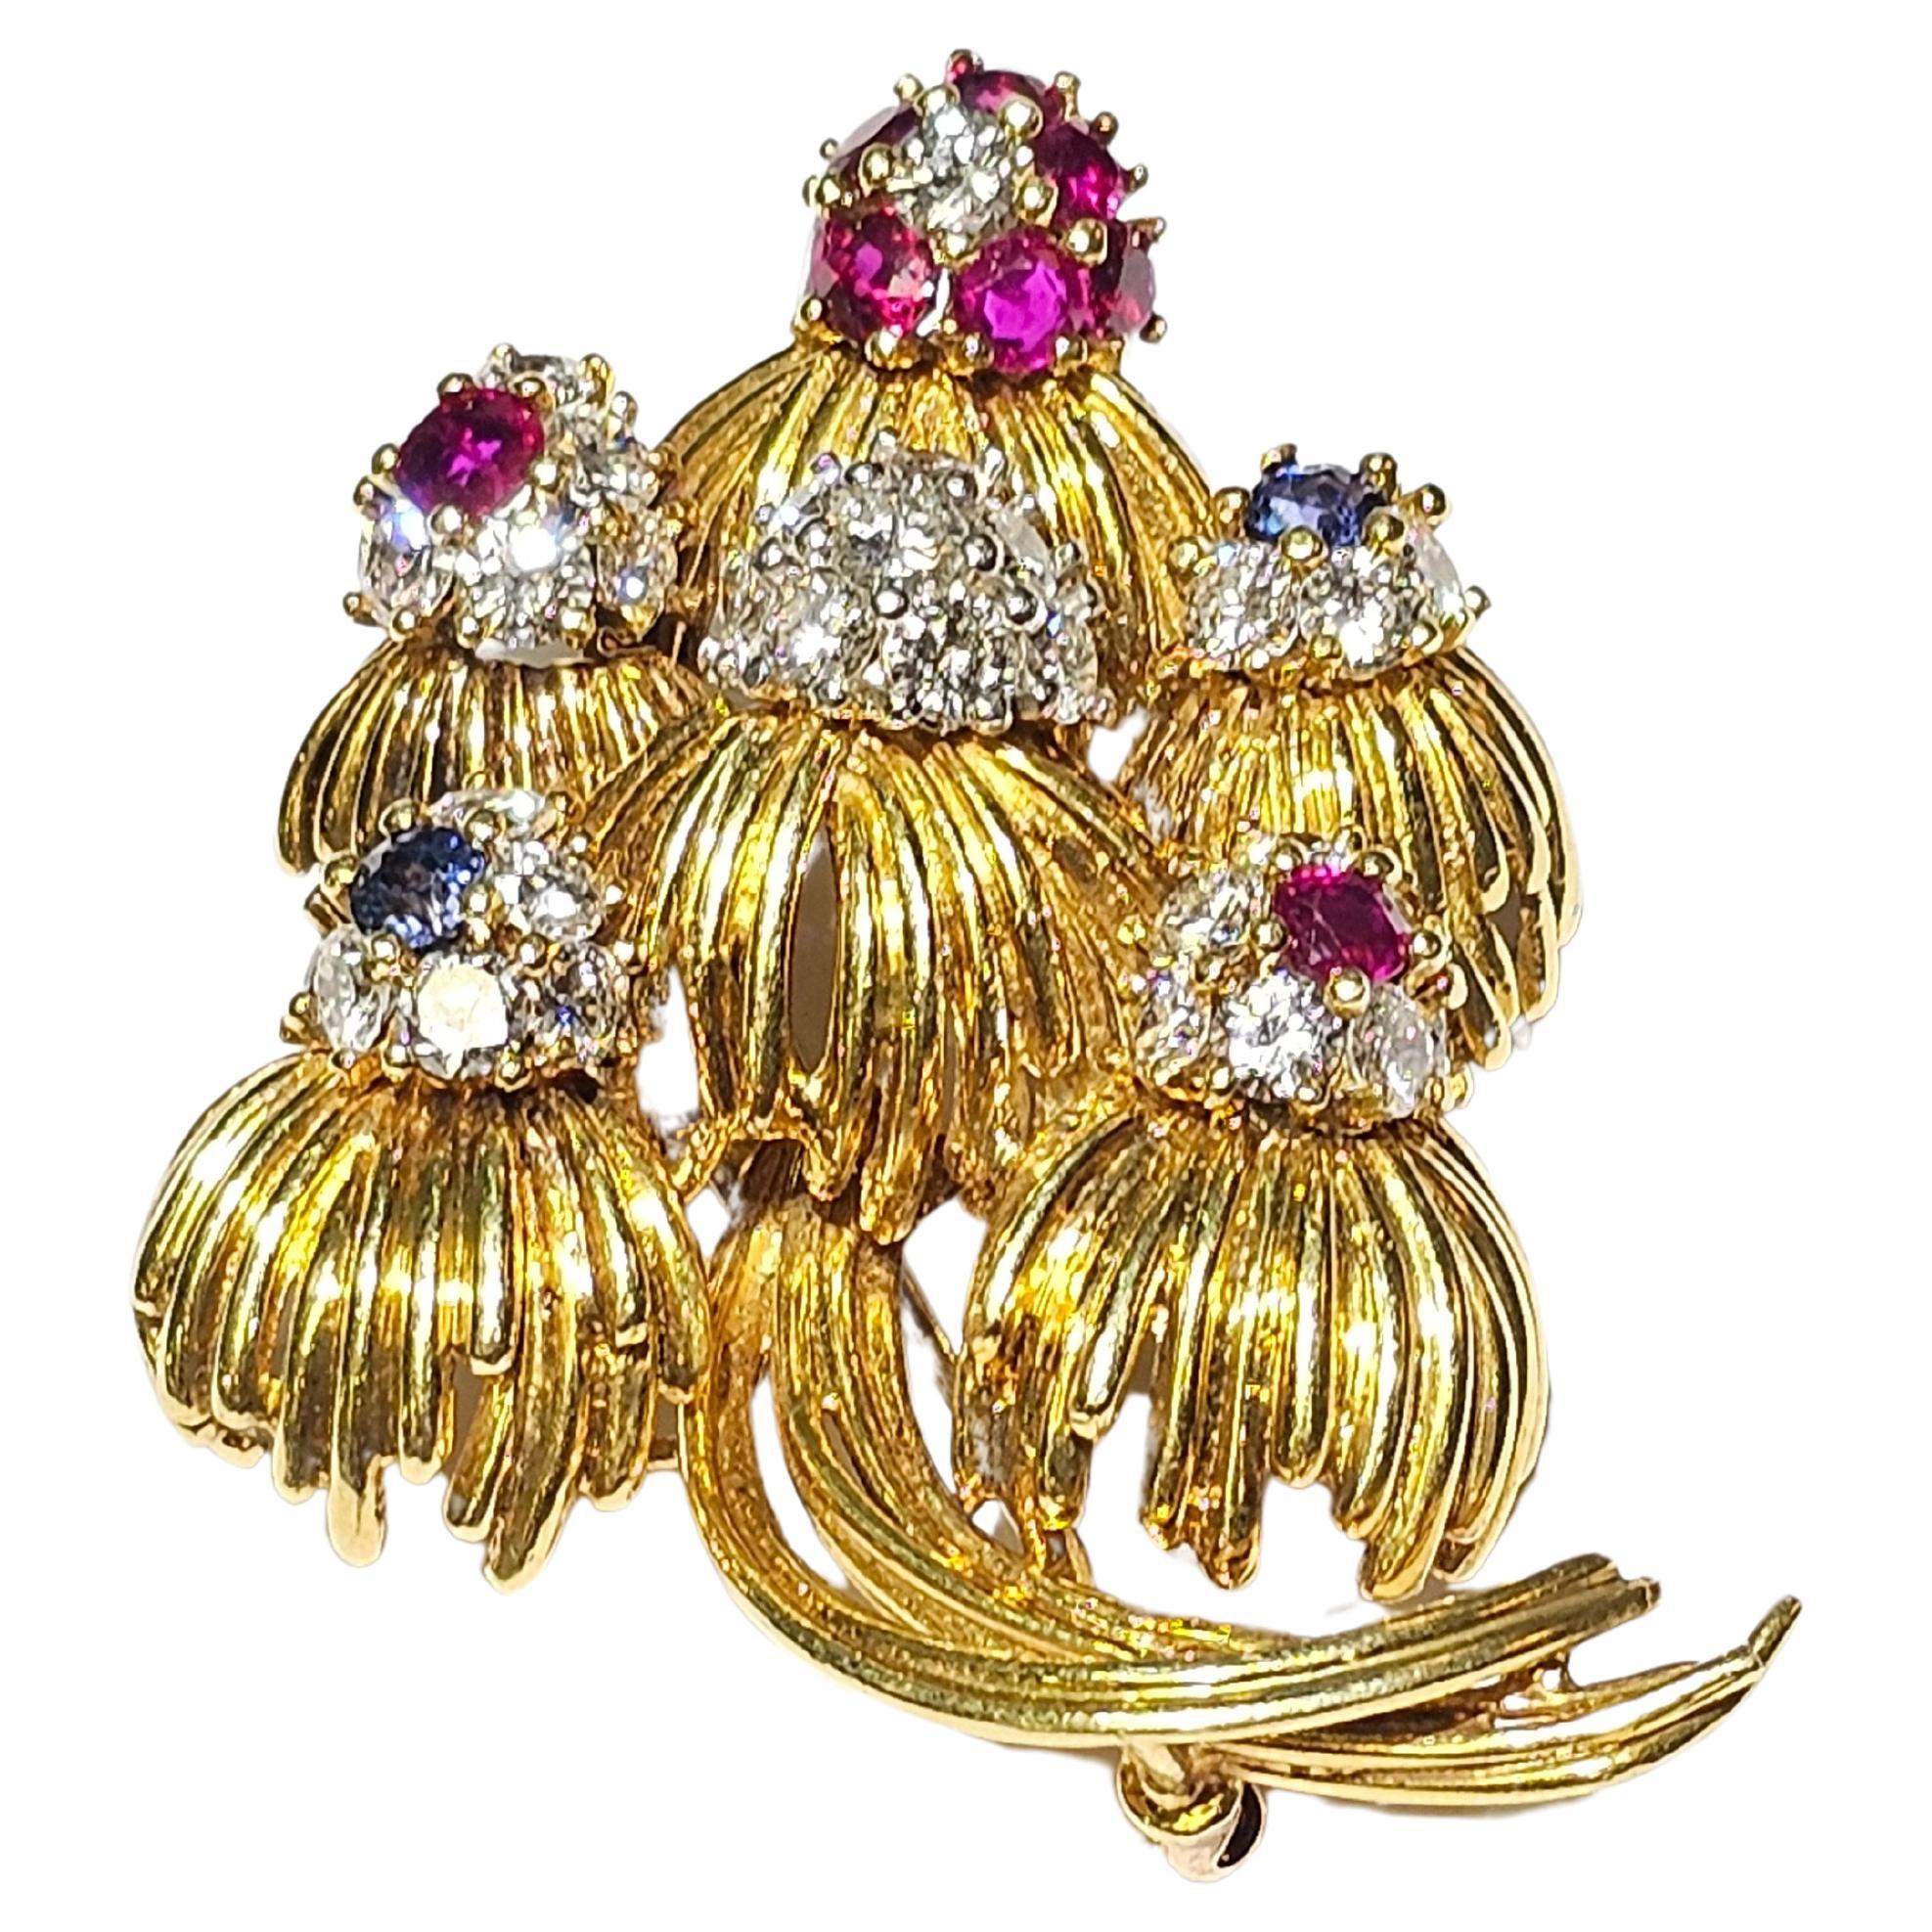 Multi Gem Floral Brooch

An 18-karat yellow gold brooch set with 33 round cut diamonds, 9 round cut rubies, and 2 round cut sapphires

Stamped 18K

Measurements: 1.88